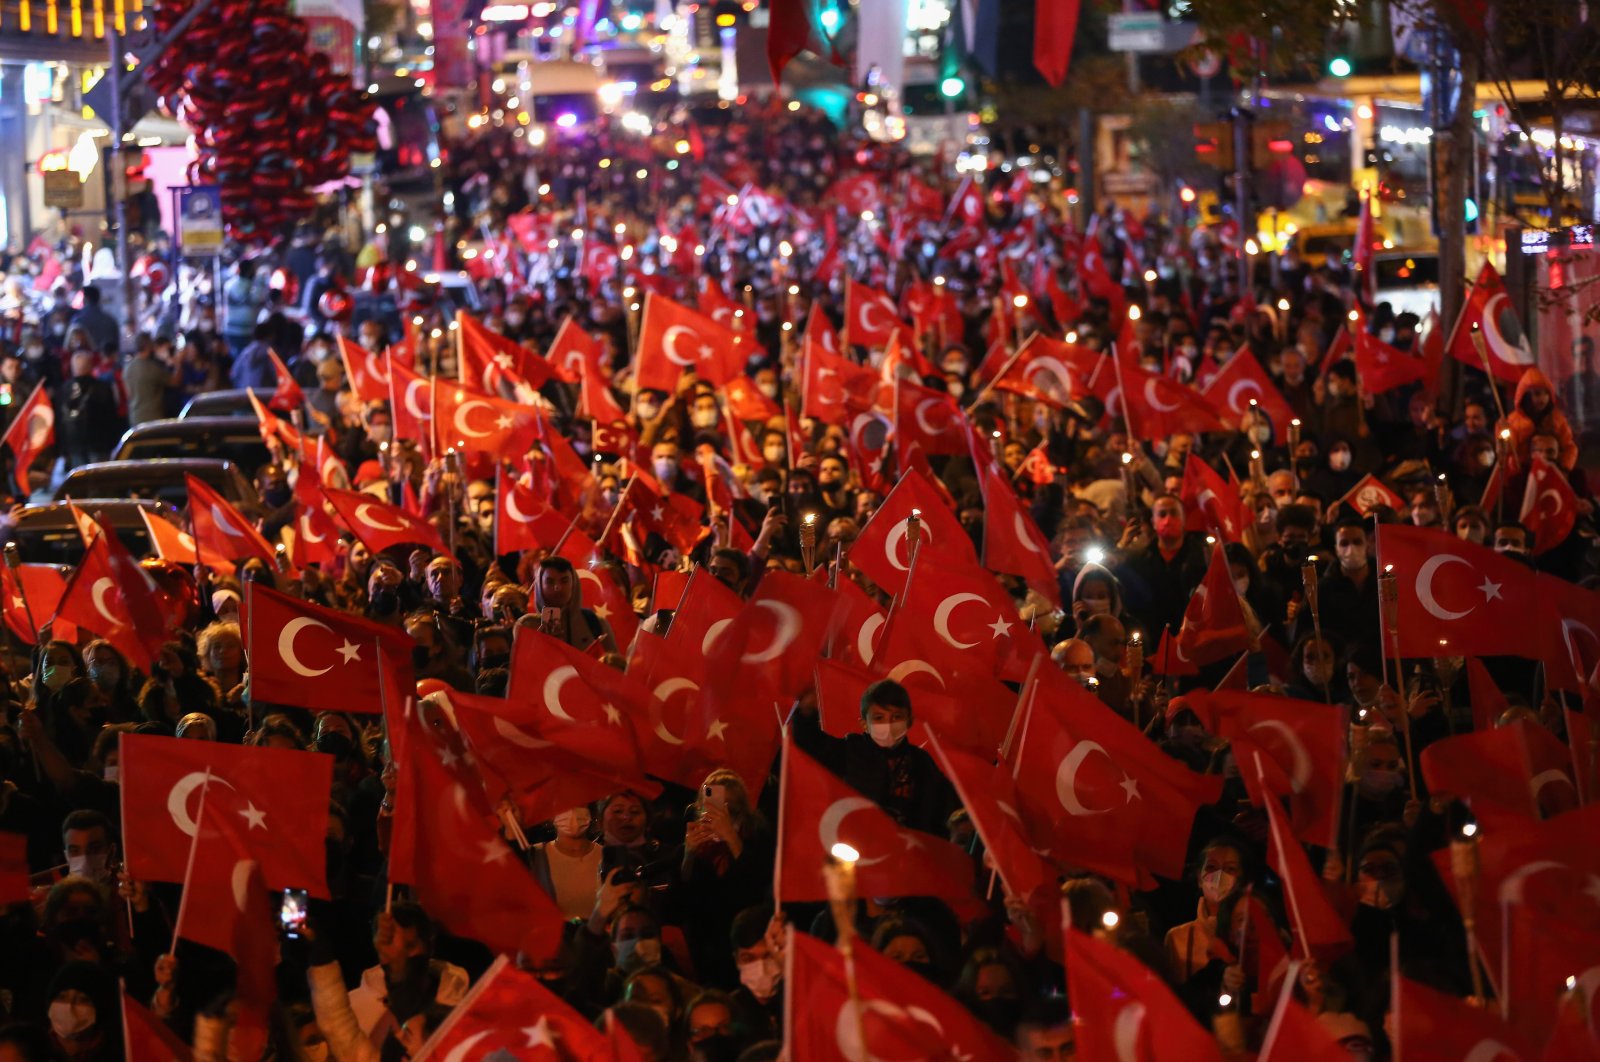 People waving Turkish flags shouting slogans during the 98th anniversary celebrations of Republic Day, Istanbul, Turkey, Oct. 29, 2021. (Photo by Getty Images)